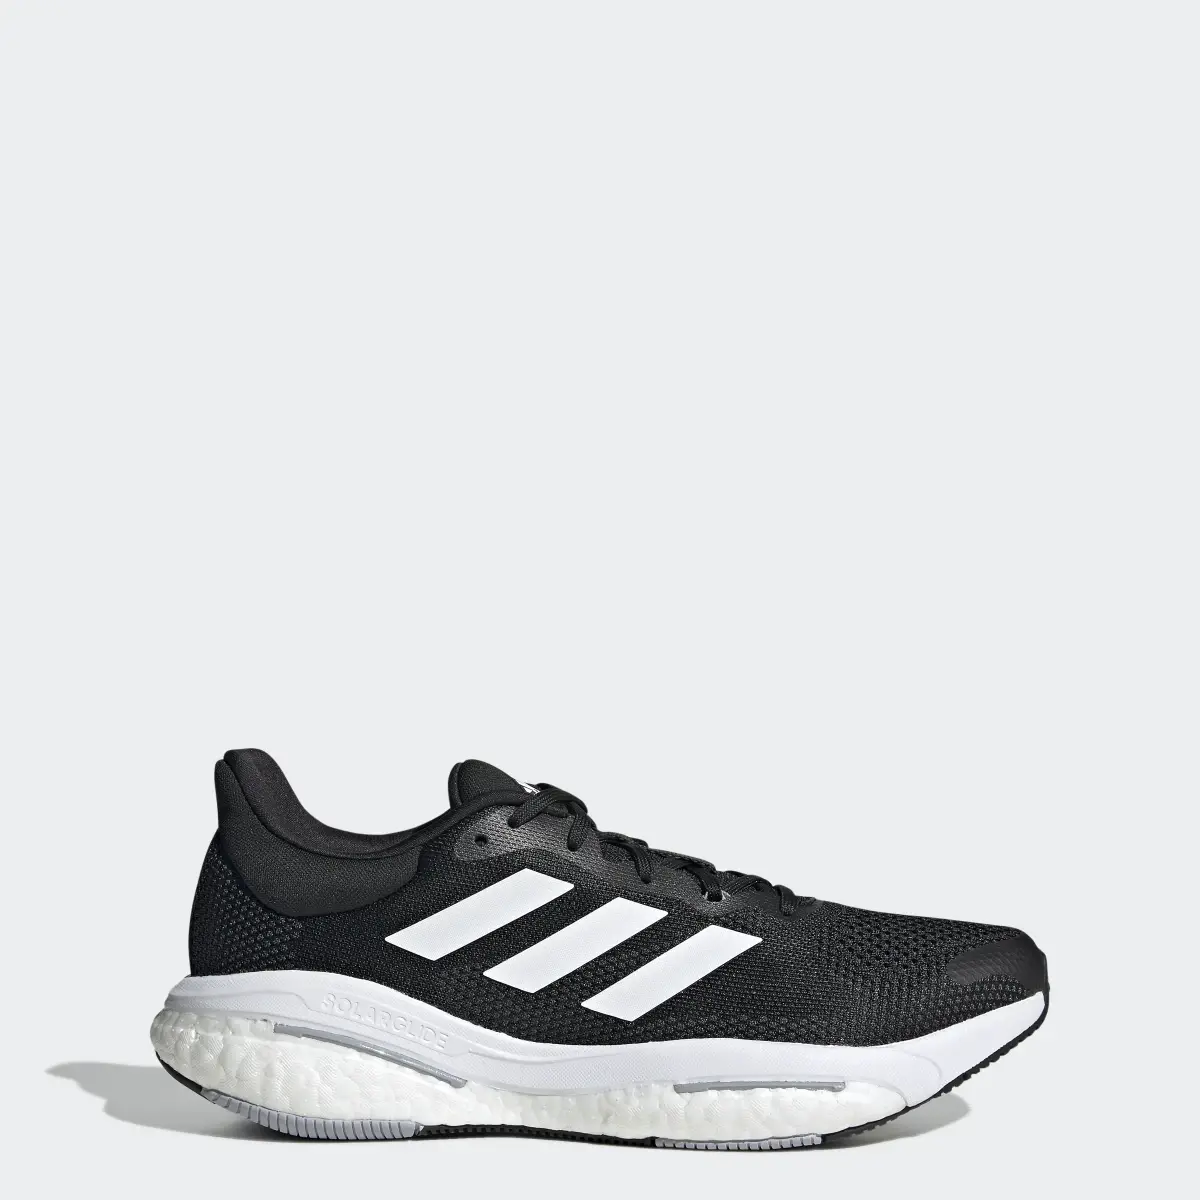 Adidas Solar Glide 5 Shoes Wide. 1